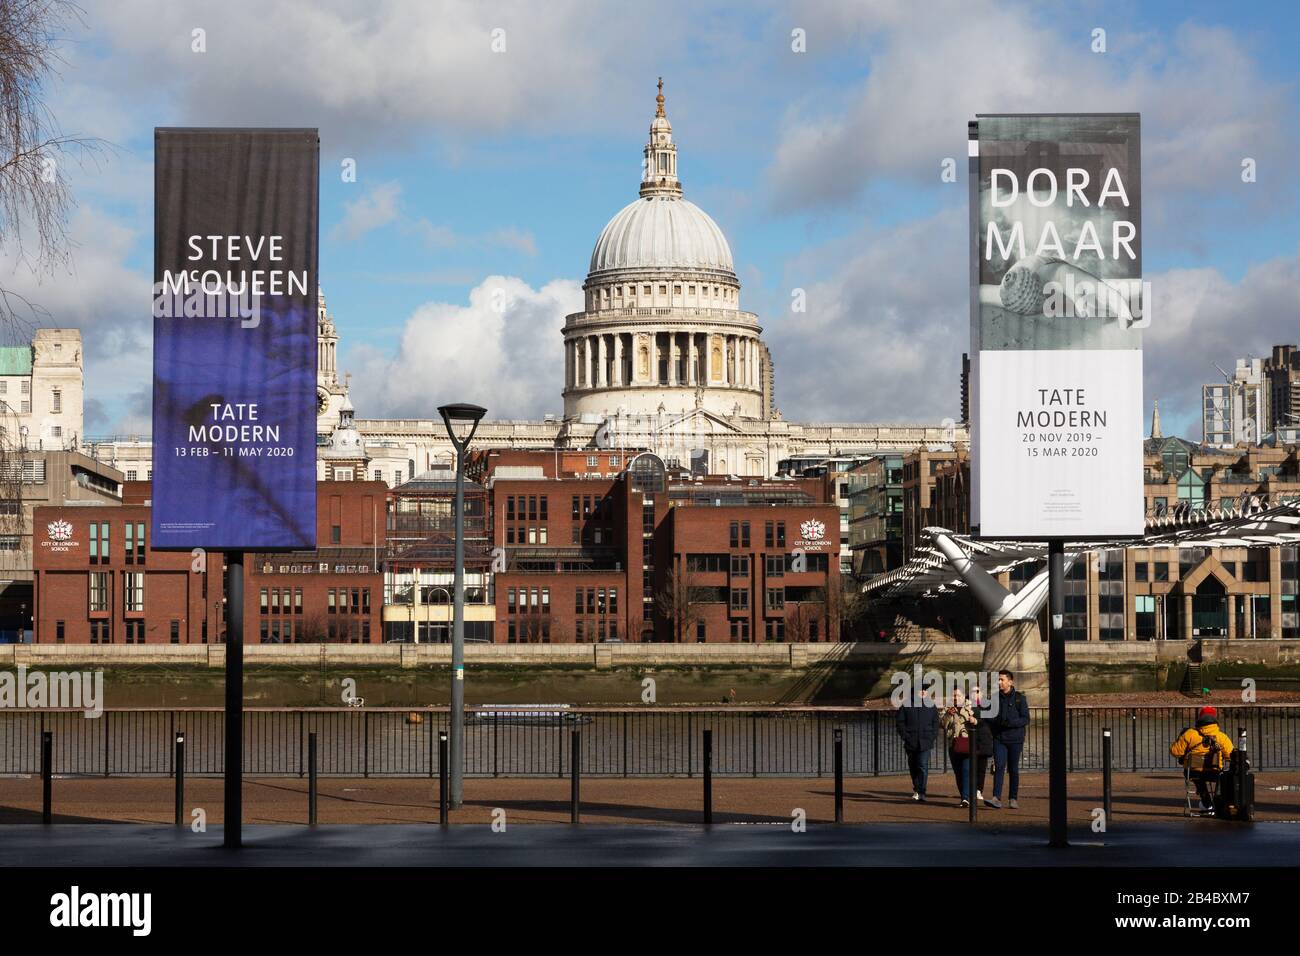 London South Bank - St Pauls Cathedral flanked by signs for the Tate Modern Art Gallery, and the river Thames, South Bank, London UK Stock Photo